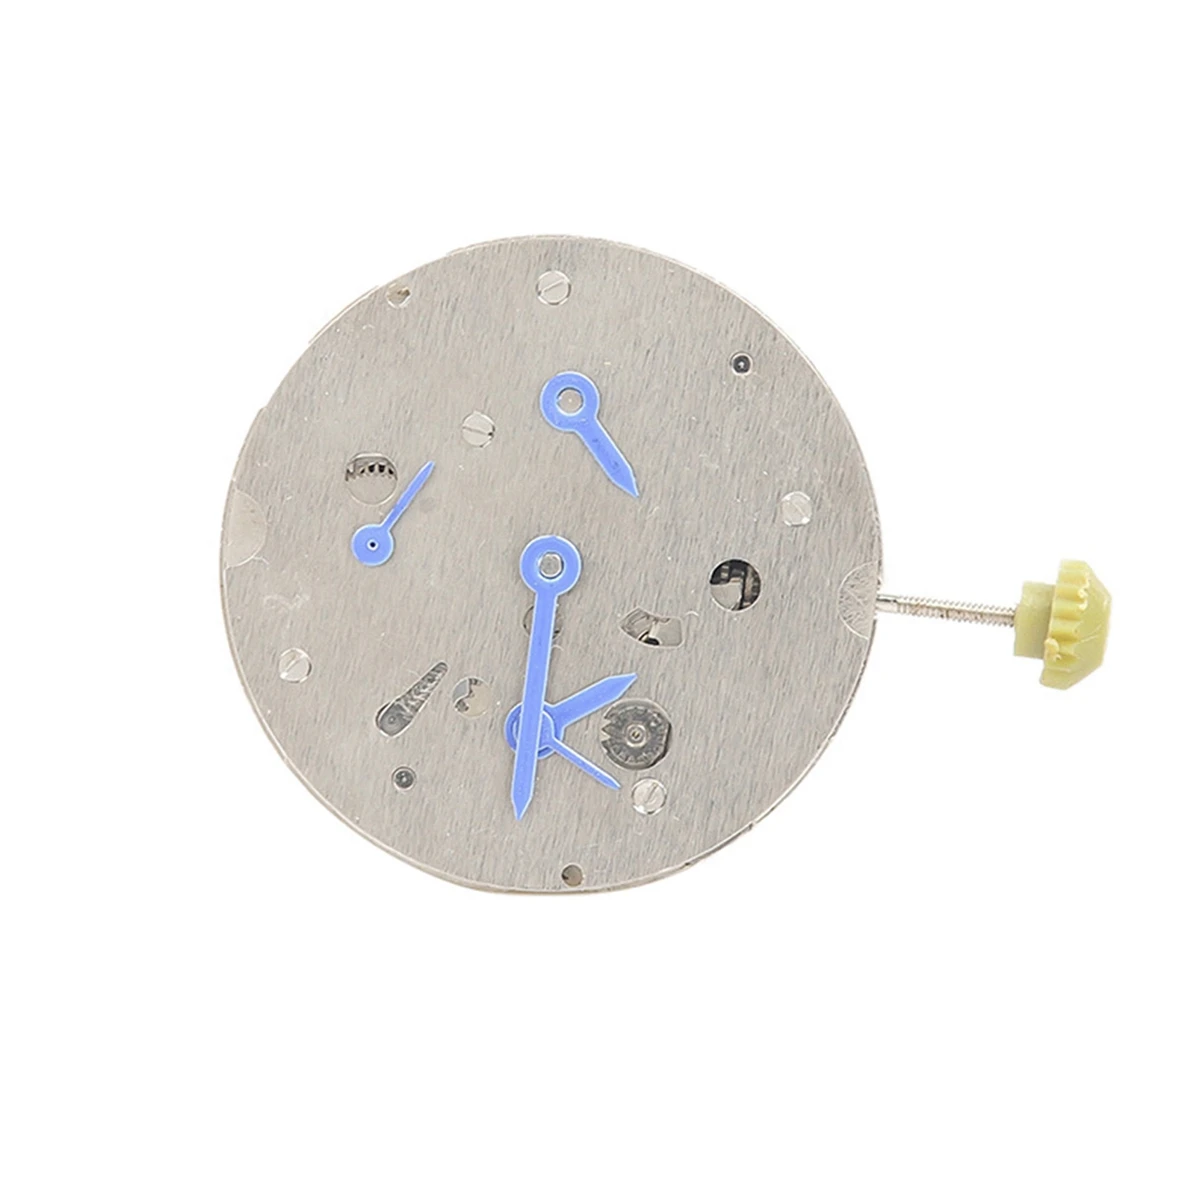 

Watch Accessories Automatic Mechanical Movement Six-Pin Calendarless Movement Suitable for 8205 8215